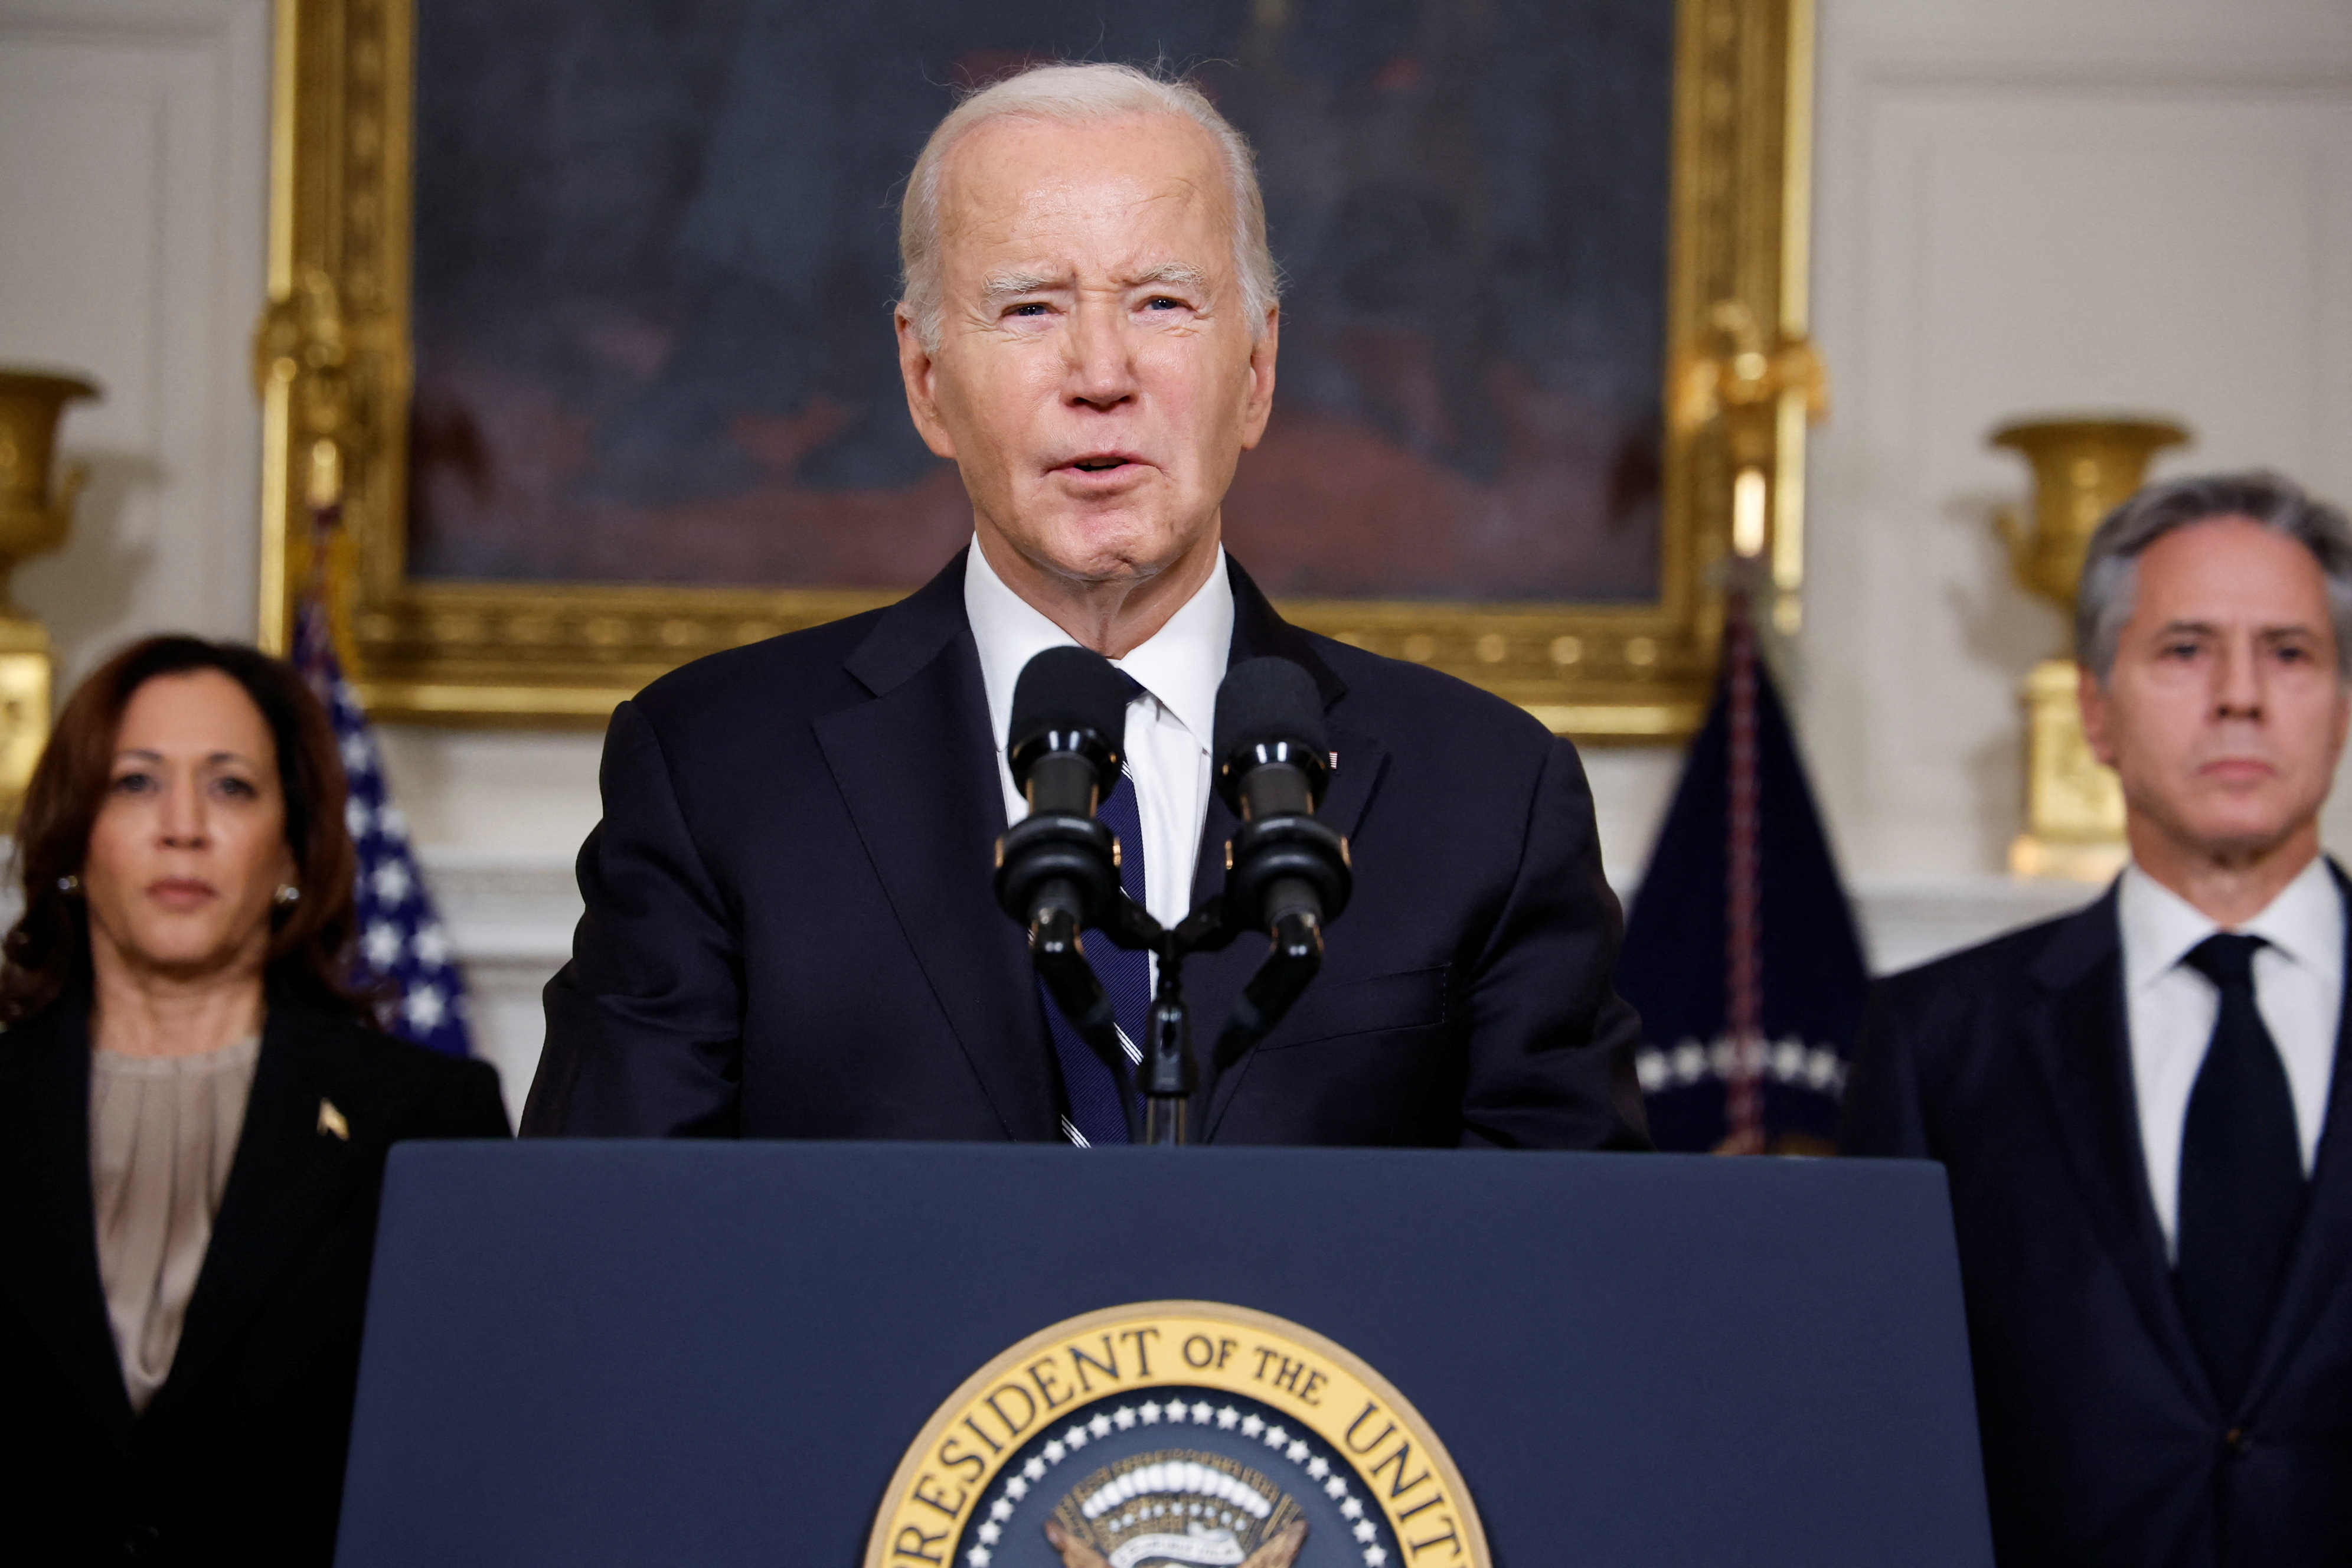 U.S. President Joe Biden, accompanied by Vice President Kamala Harris and U.S. Secretary of State Antony Blinken, makes remarks after speaking by phone with Israeli Prime Minister Benjamin Netanyahu about the situation in Israel following Hamas' deadly attacks, from the State Dining Room at the White House in Washington, DC, on October 10, 2023.